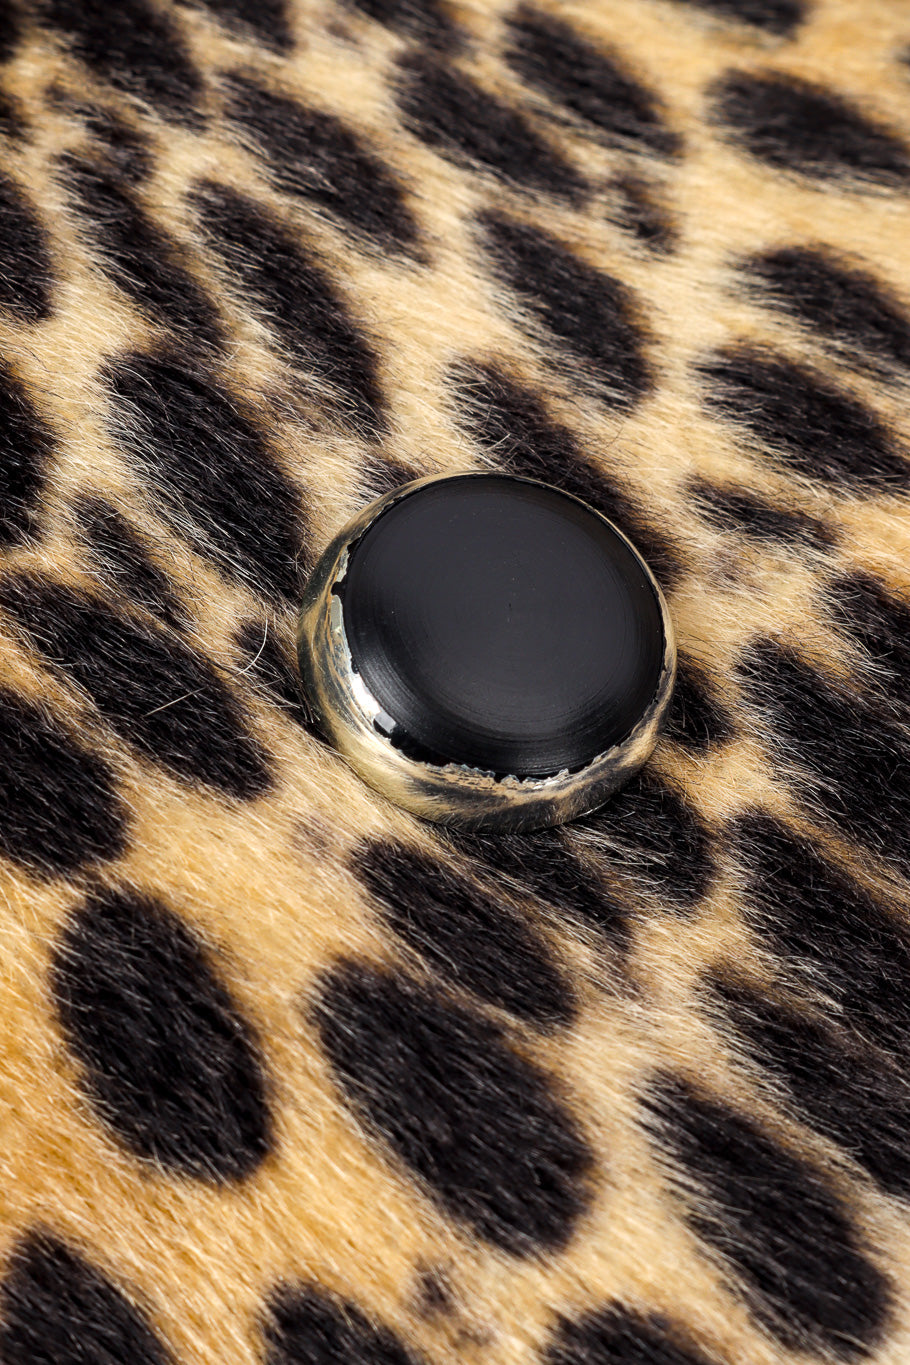 Cheetah Print Fur Coat by Russel Tayler button finish chipping  @recessla